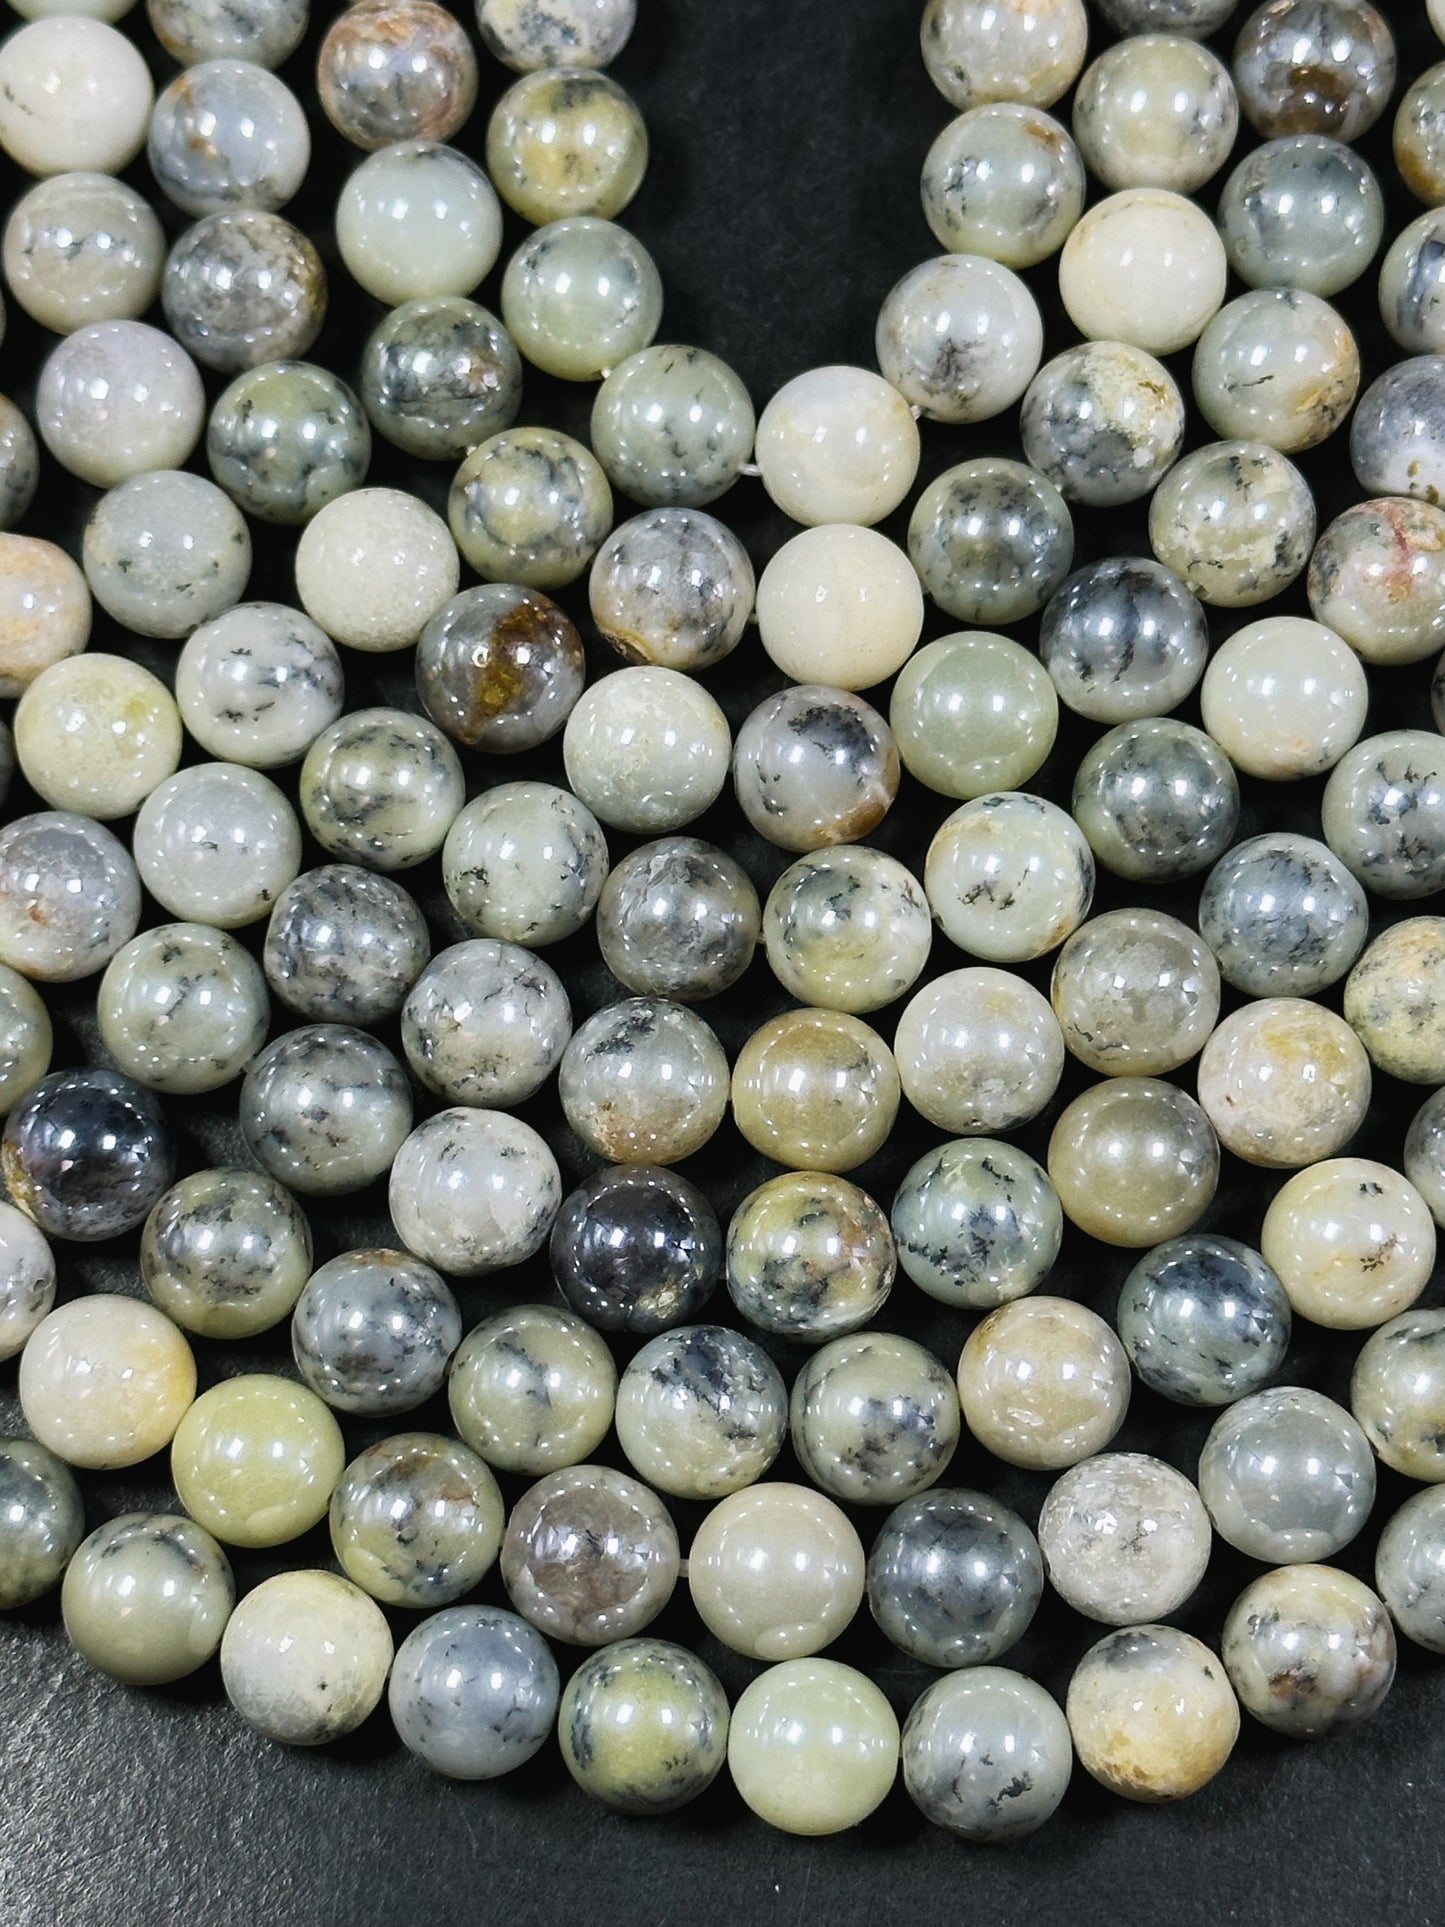 AAA Mystic Natural Opal Gemstone Bead 8mm 10mm 12mm Round Bead, Beautiful Mystic Coated White Gray Color Opal Gemstone Bead, Great Quality 15.5"